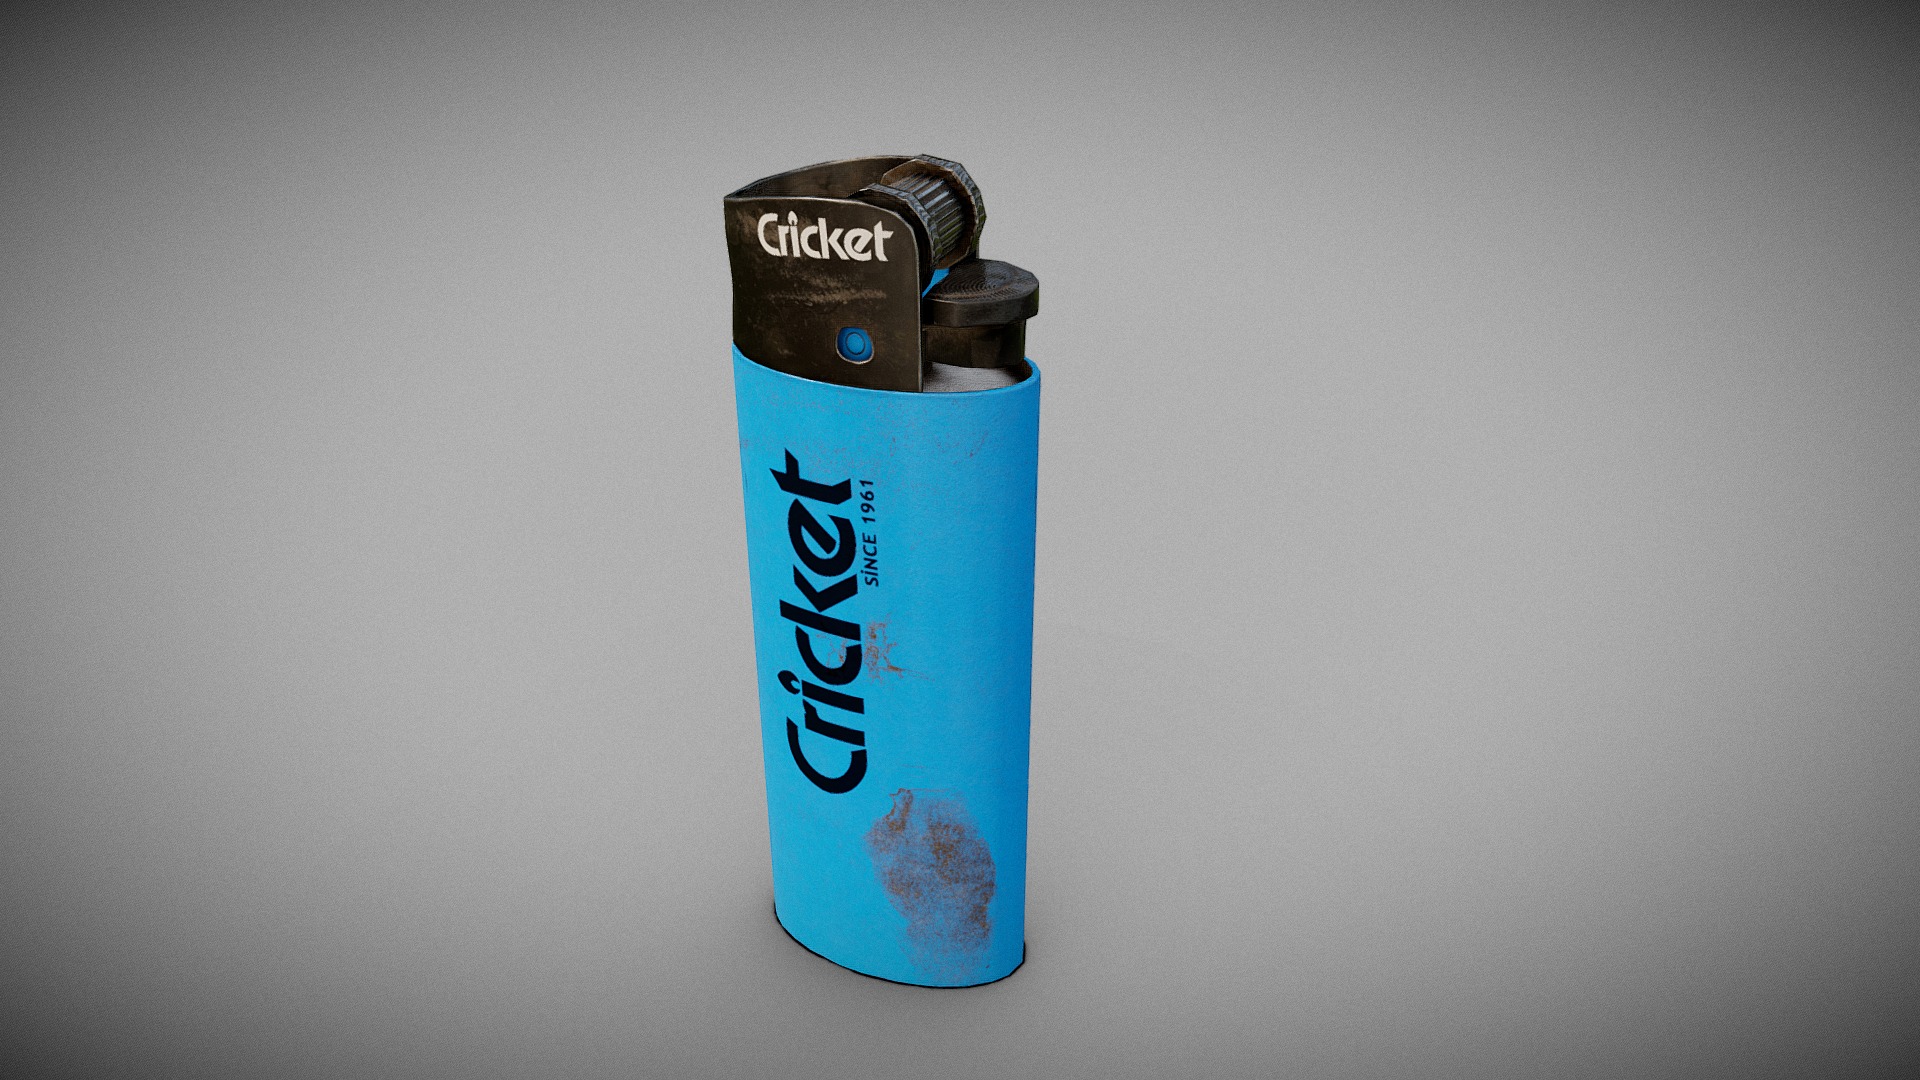 3D model Lighter - This is a 3D model of the Lighter. The 3D model is about a blue and black can.